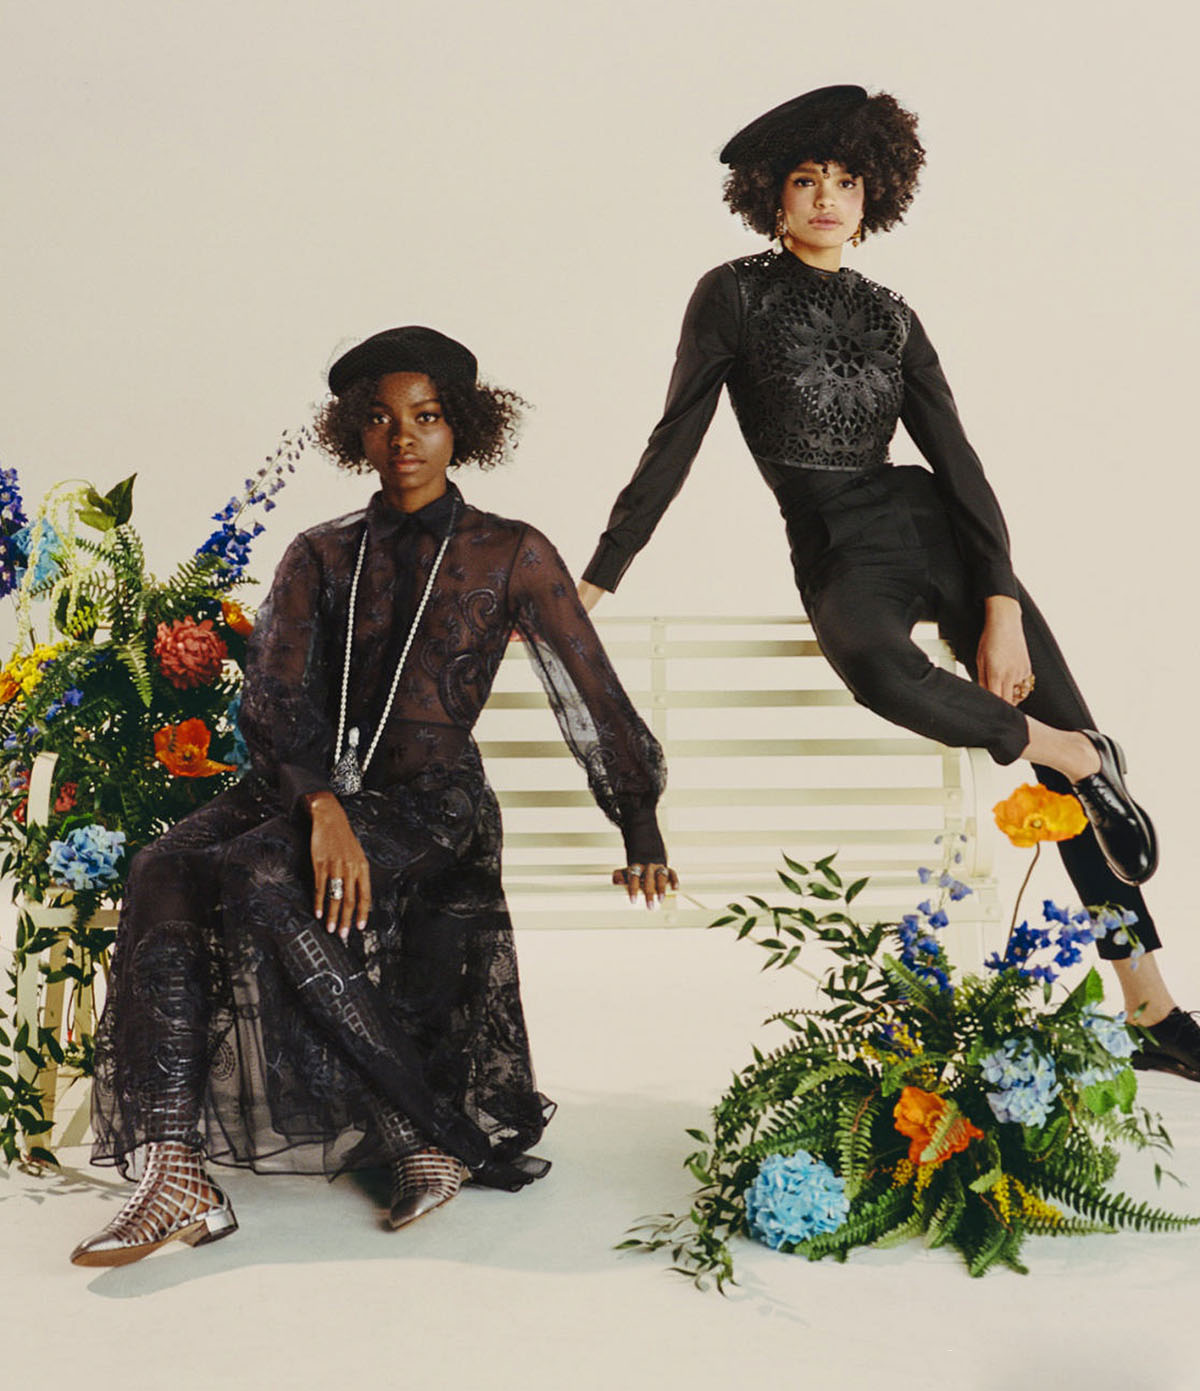 Olamide Ogundele and Carla Pereira by Danny Kasirye for Town & Country May 2021